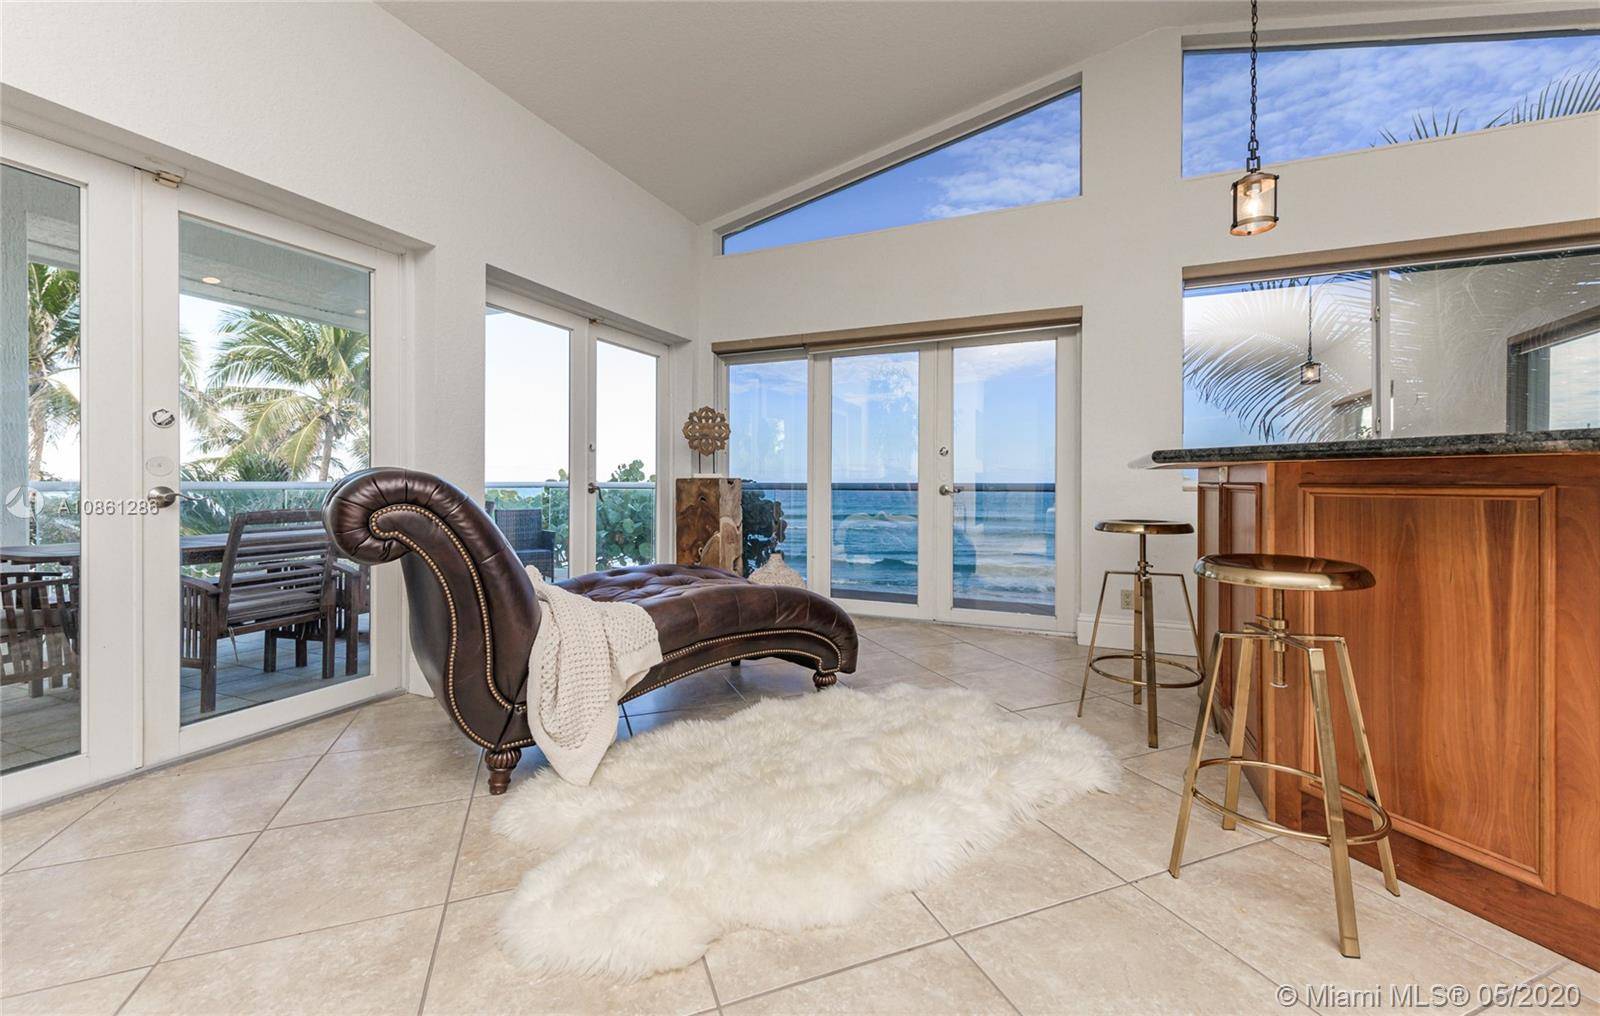 This Spacious Cozy Two Story Beach House with Mesmerizing Panoramic Ocean Views from it's every corner located right on the white sands at the end of the famous Hollywood Boardwalk ...